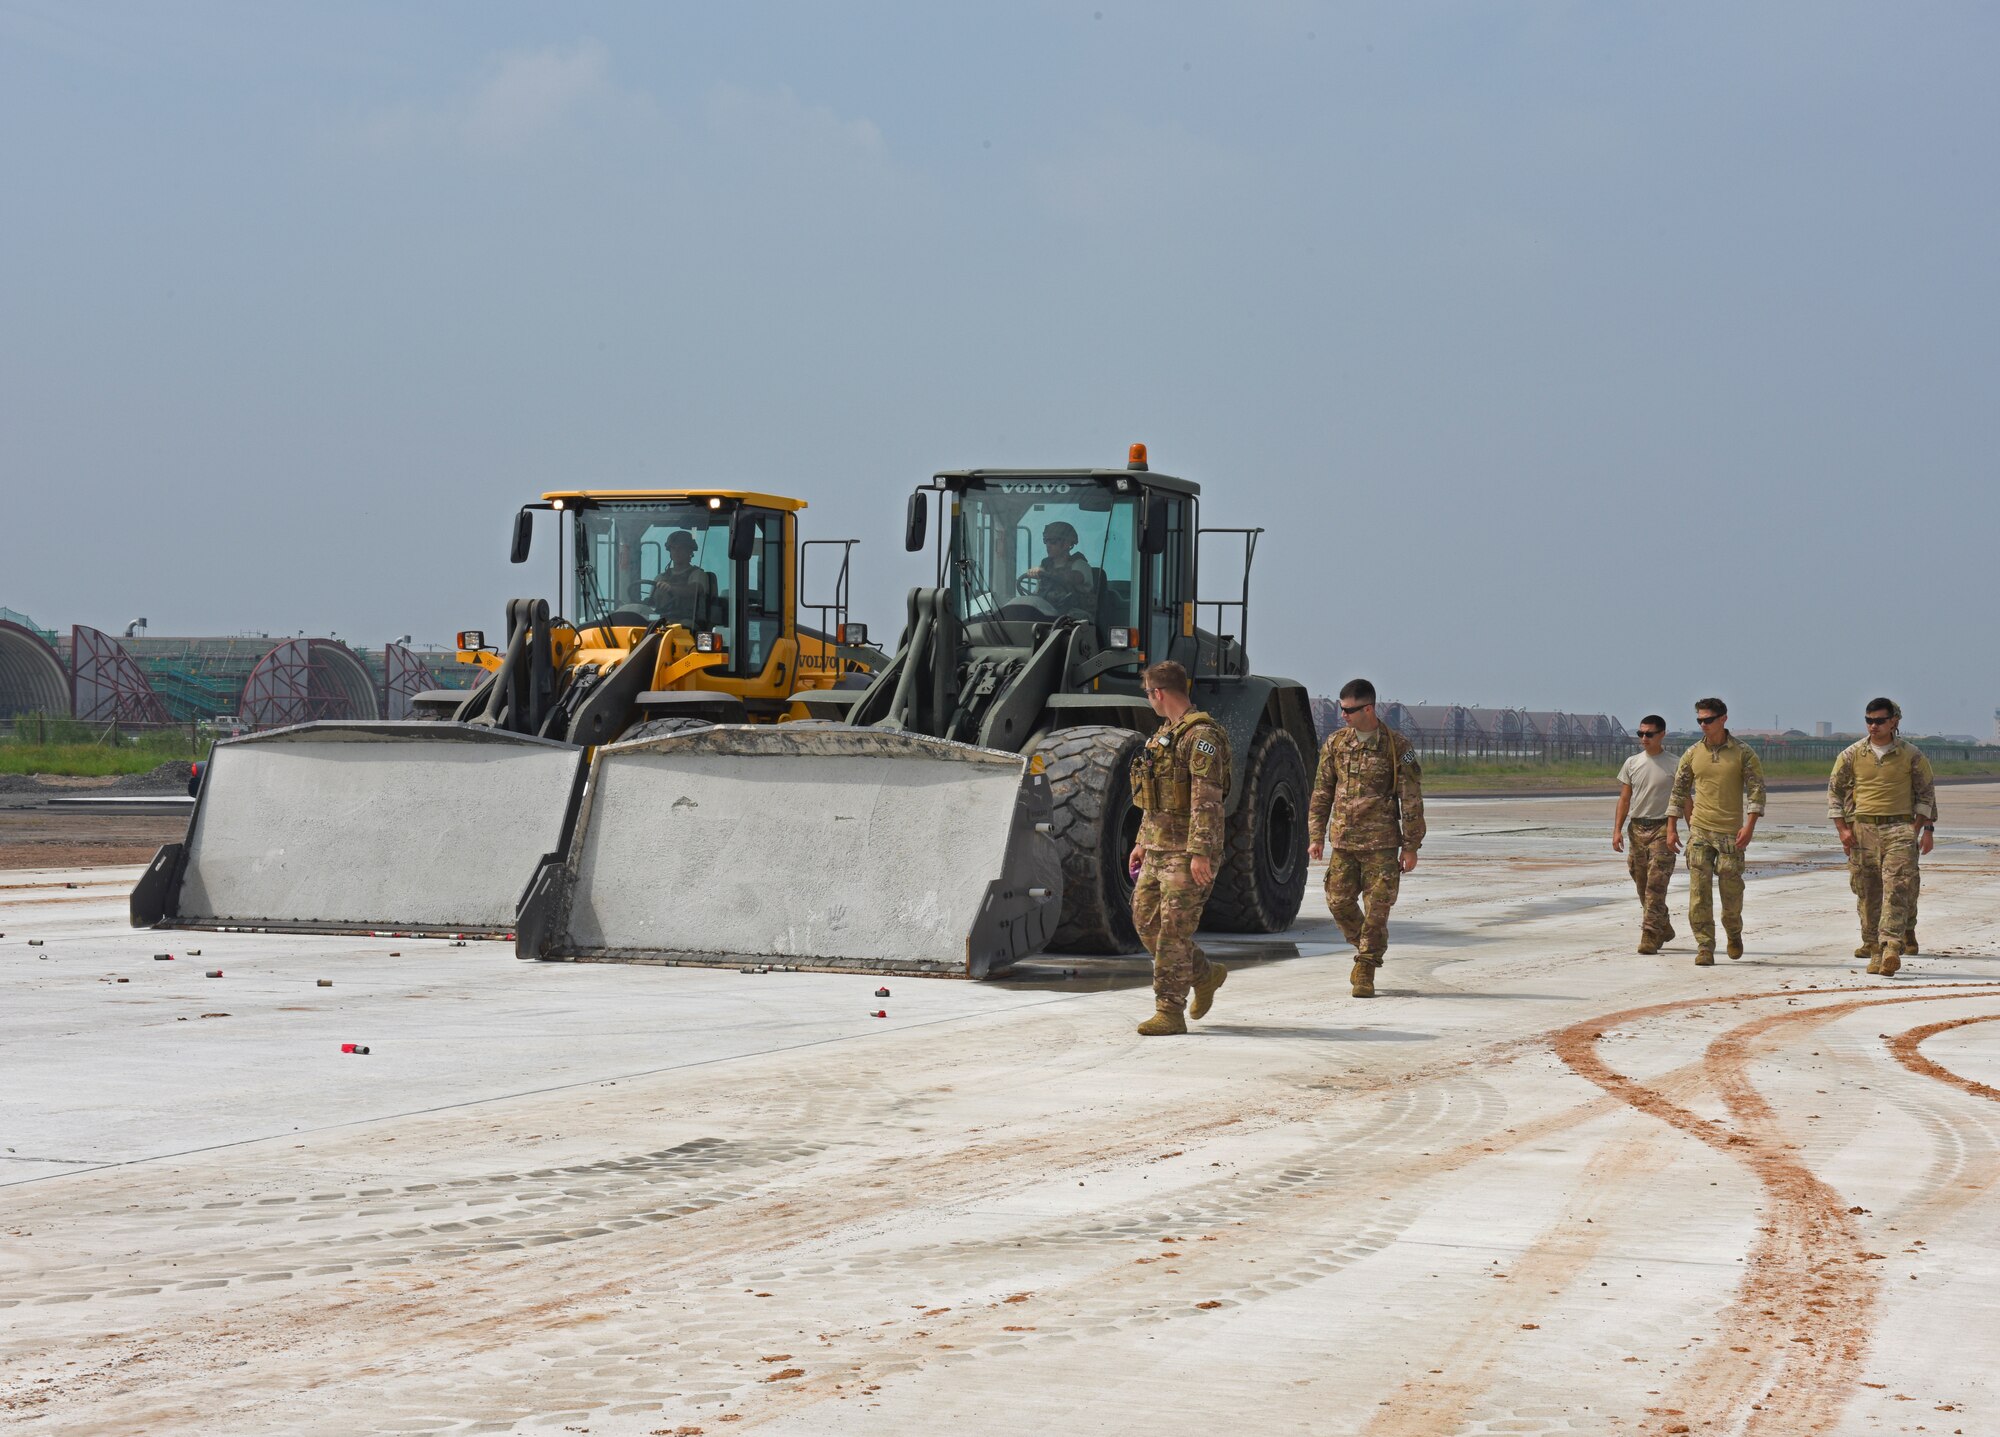 Members of the 8th Civil Engineer Squadron Explosive Ordnance Disposal unit conduct ordnance disposal training at Kunsan Air Base, Republic of Korea, Aug. 22, 2019. The 8th CES EOD unit partnered with the Republic of Korea Air Force’s 38th Fighter Group EOD unit to conduct joint ordnance disposal training, share response procedures and focus on enhancing mission capabilities. (U.S. Air Force photo by Staff Sgt. Mackenzie Mendez)